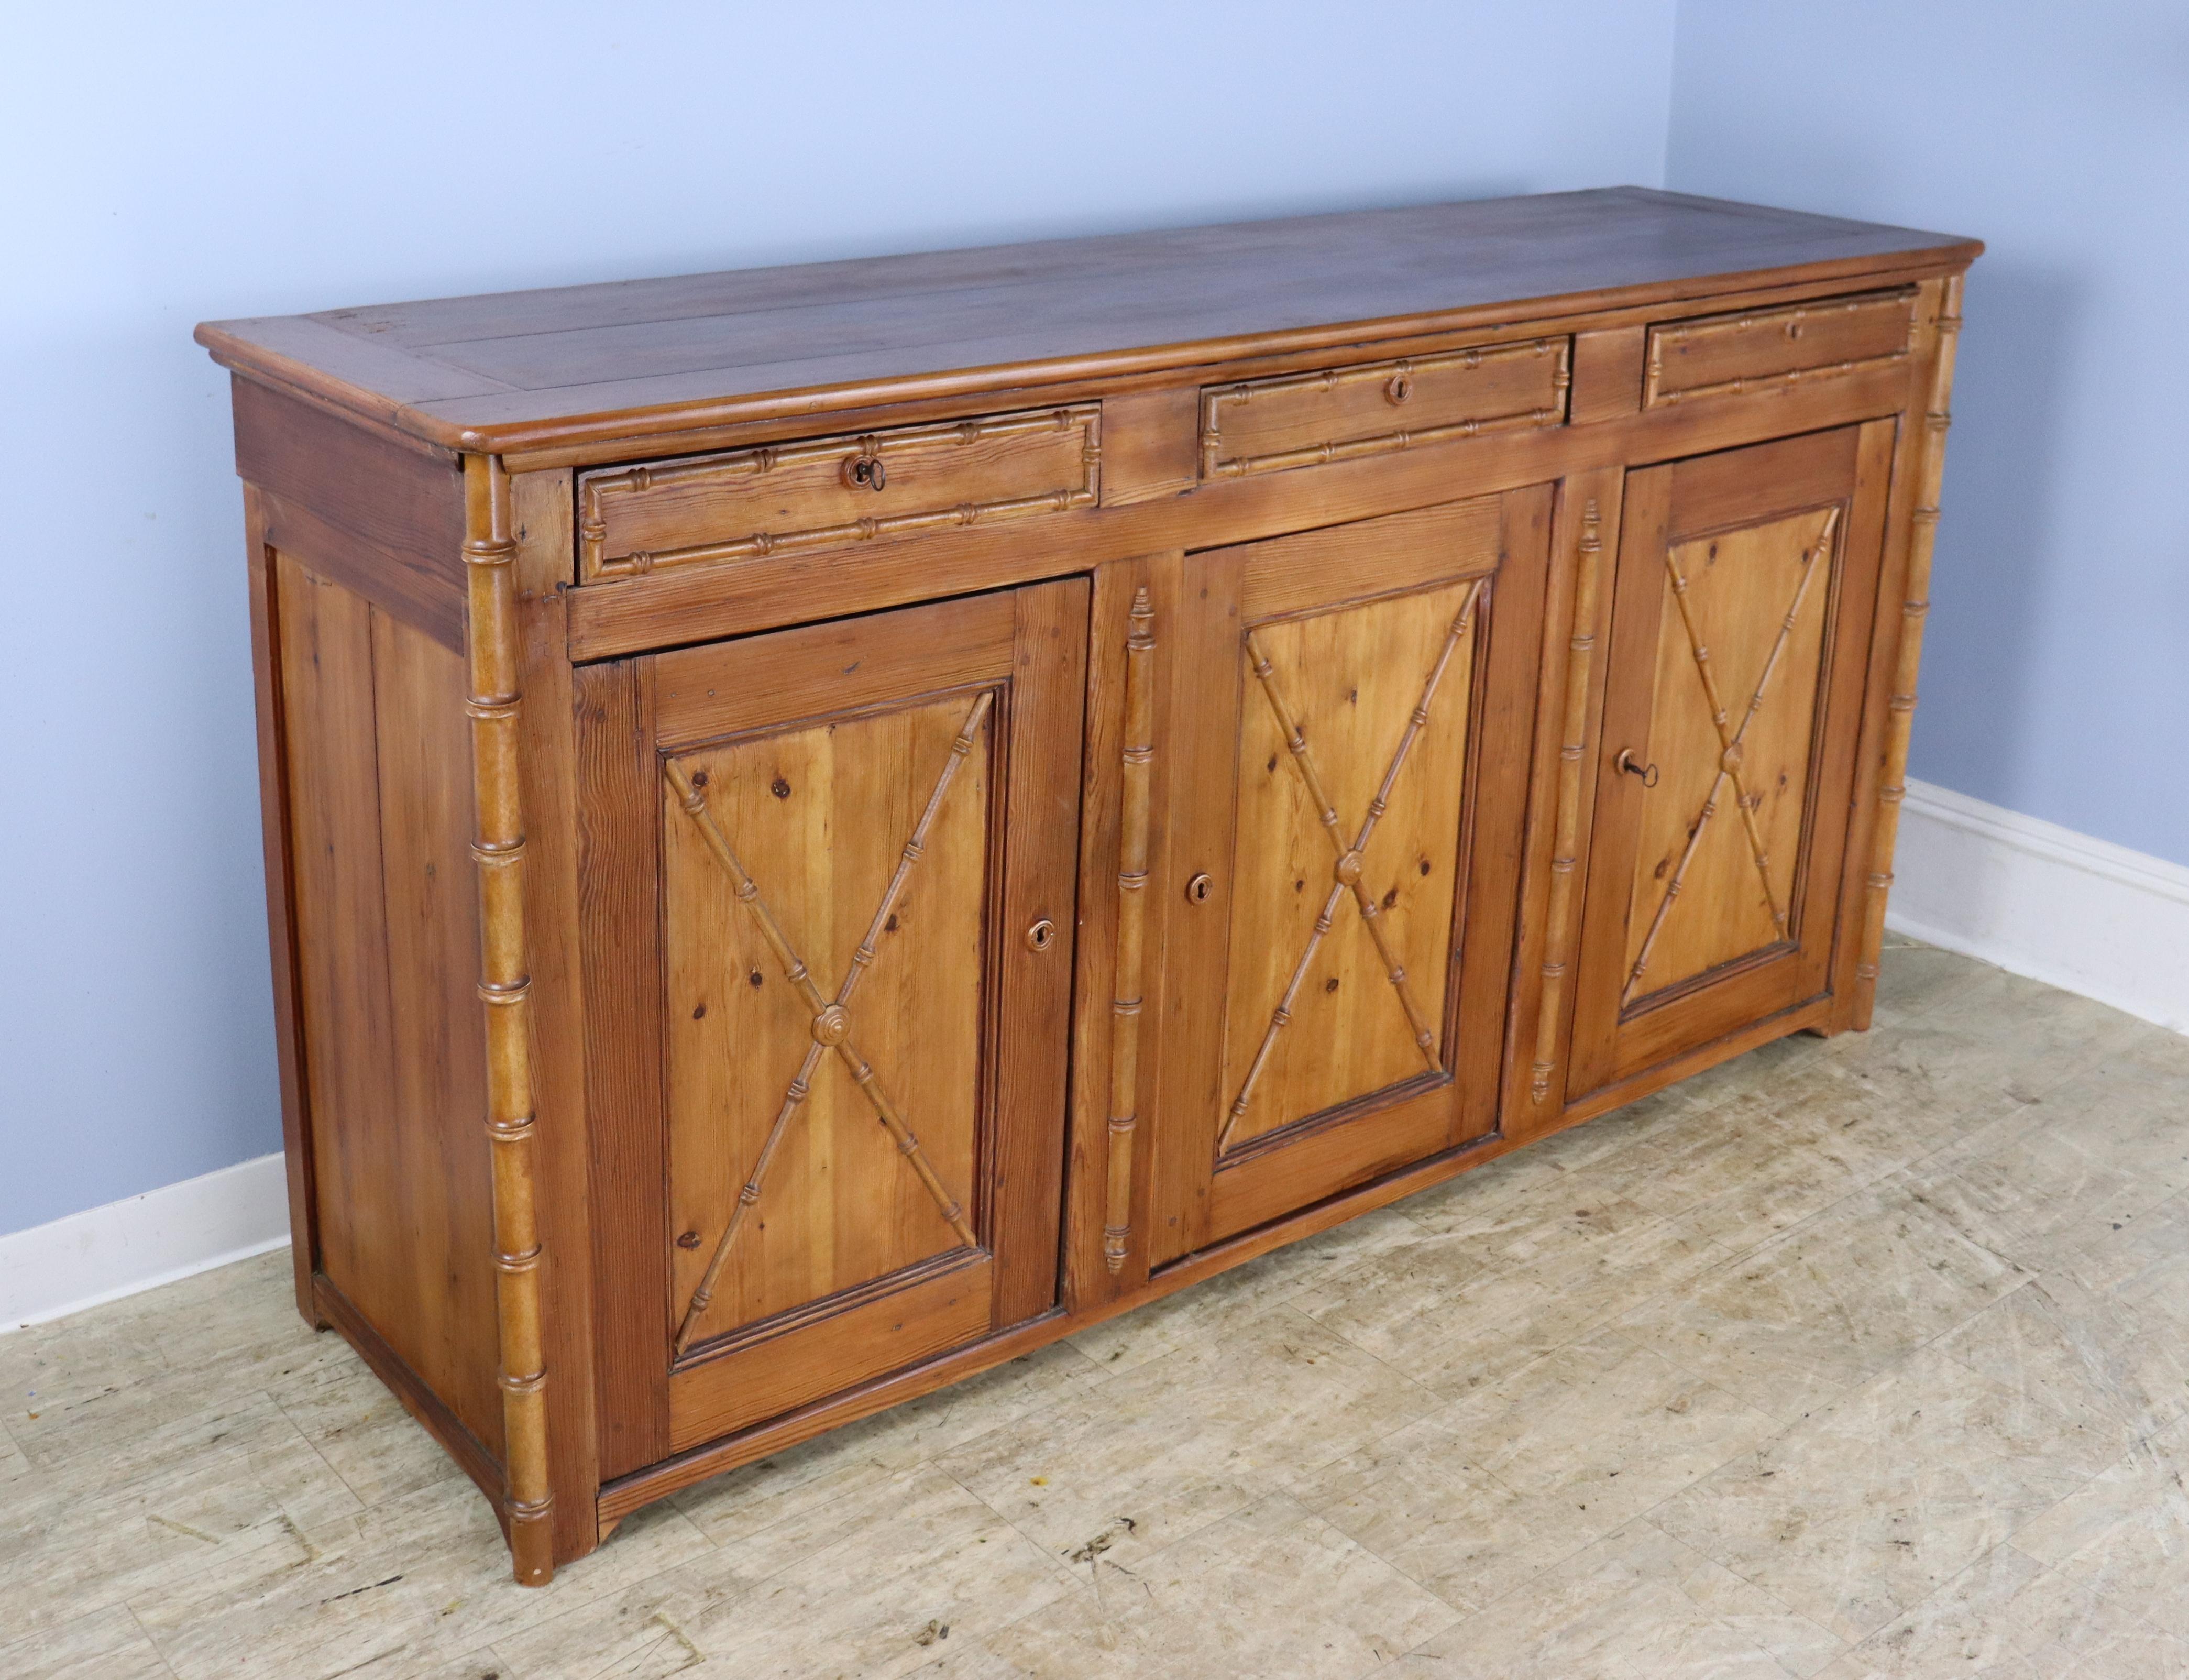 A three door enfilade or buffet with three compartments and a non-adjustable interior shelf.  All three doors lock with the original key.  The bamboo trim and mouldings are charming, and give this piece real visual impact.  There is some light wear